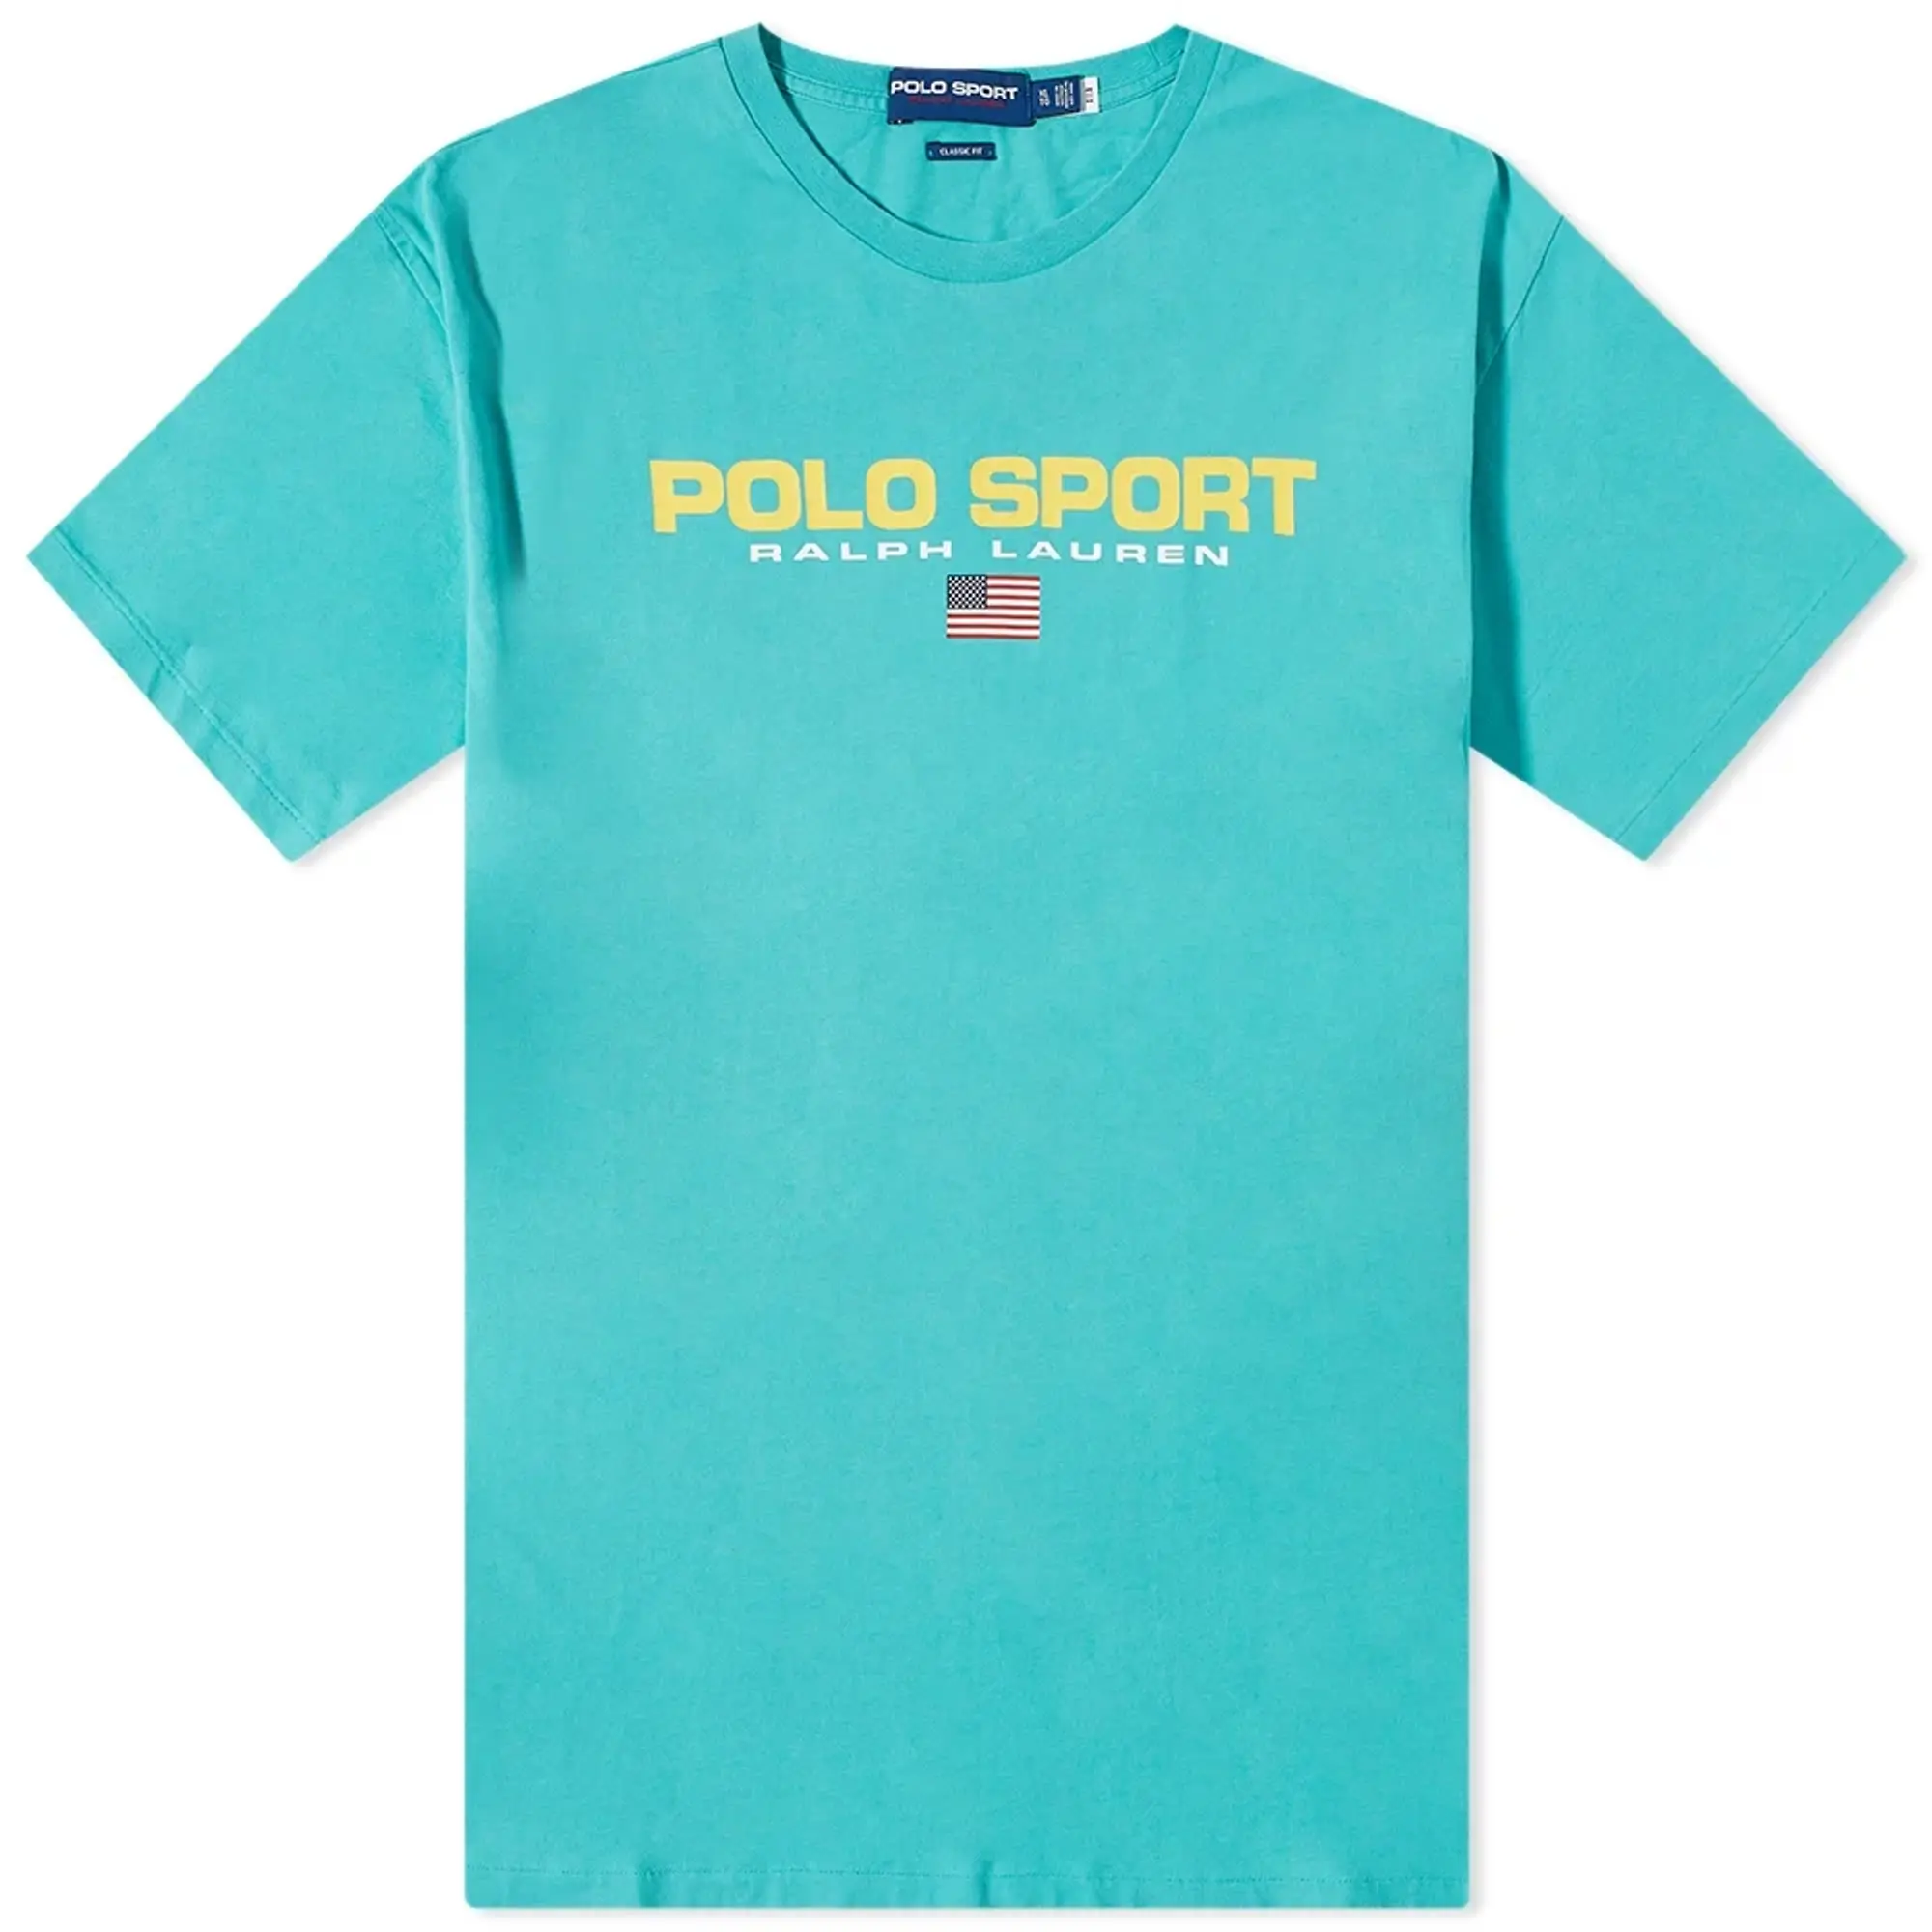 Polo Ralph Lauren Sport Washed T-Shirt Bright Teal